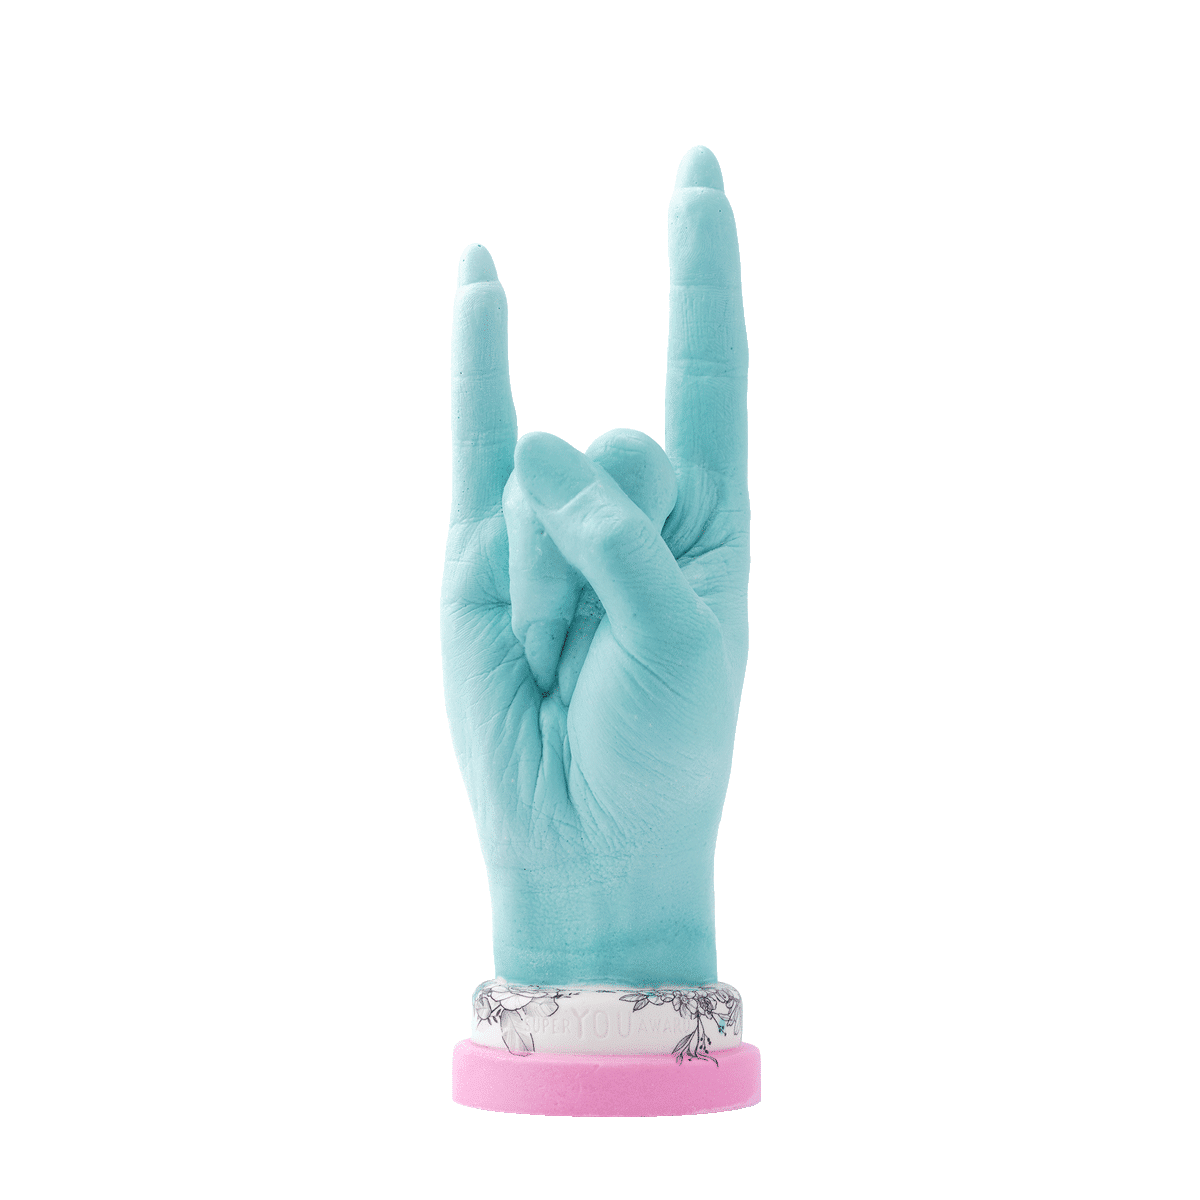 ⚡︎-SUPER-YOU-AWARD-cool-empowering-unique-gift-idea-YOU-ROCK-hand-gesture-collectible-decorative-one_of_a_kind-award-sculpture-SKY-BLUE-FLOWERS-1-Aivaras-Simonis-photo